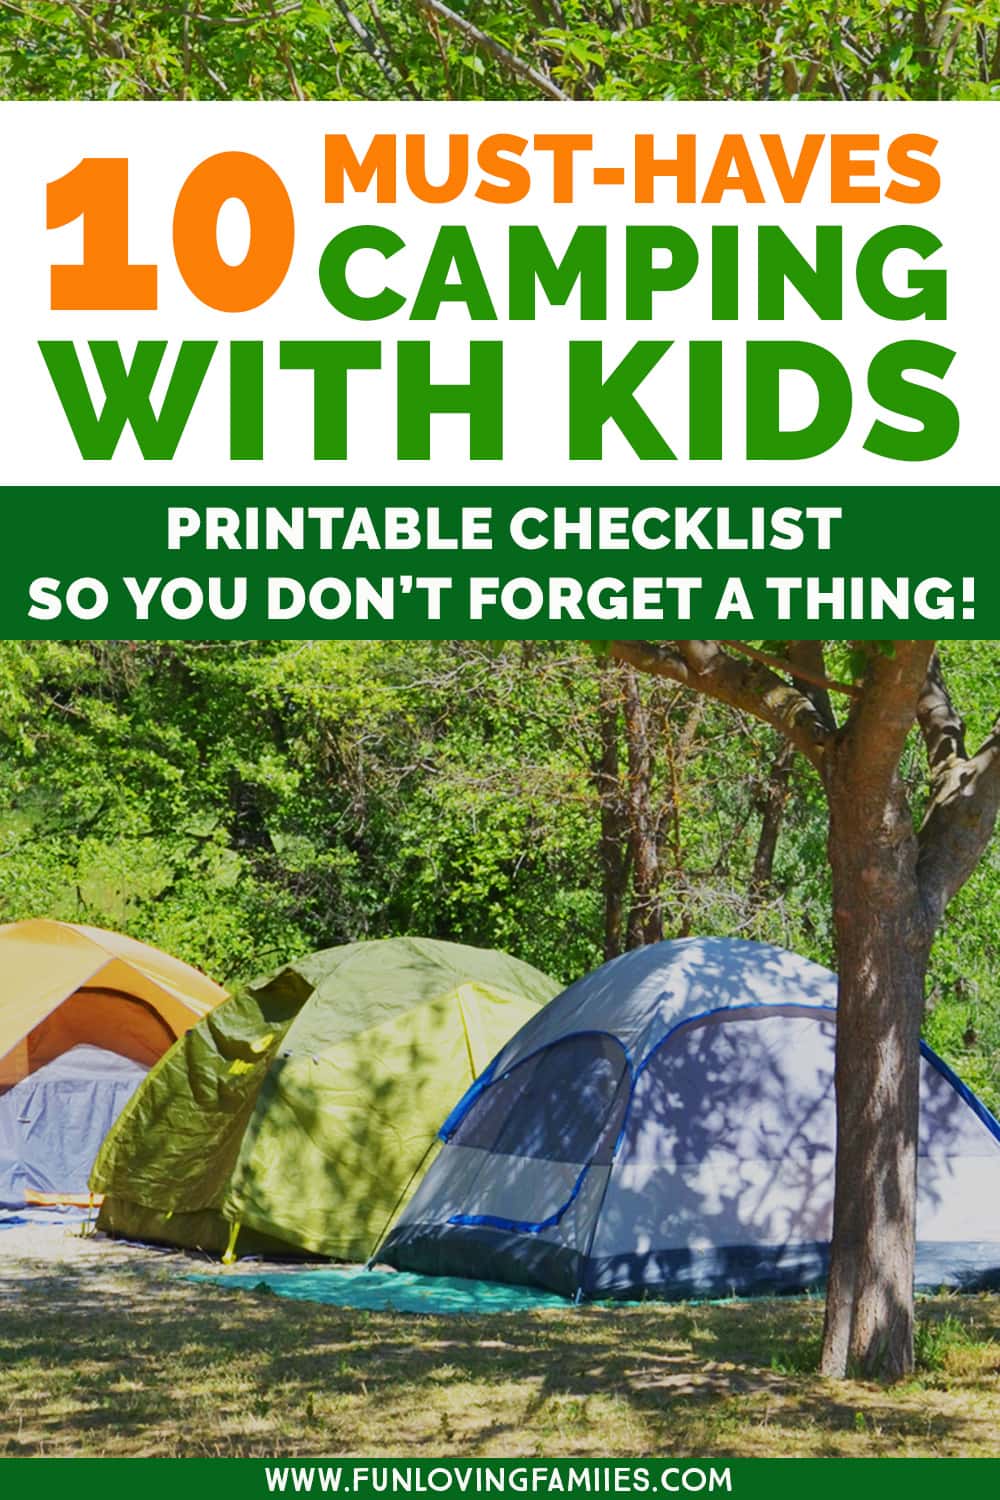 camping tents and text overlay with camping with kids